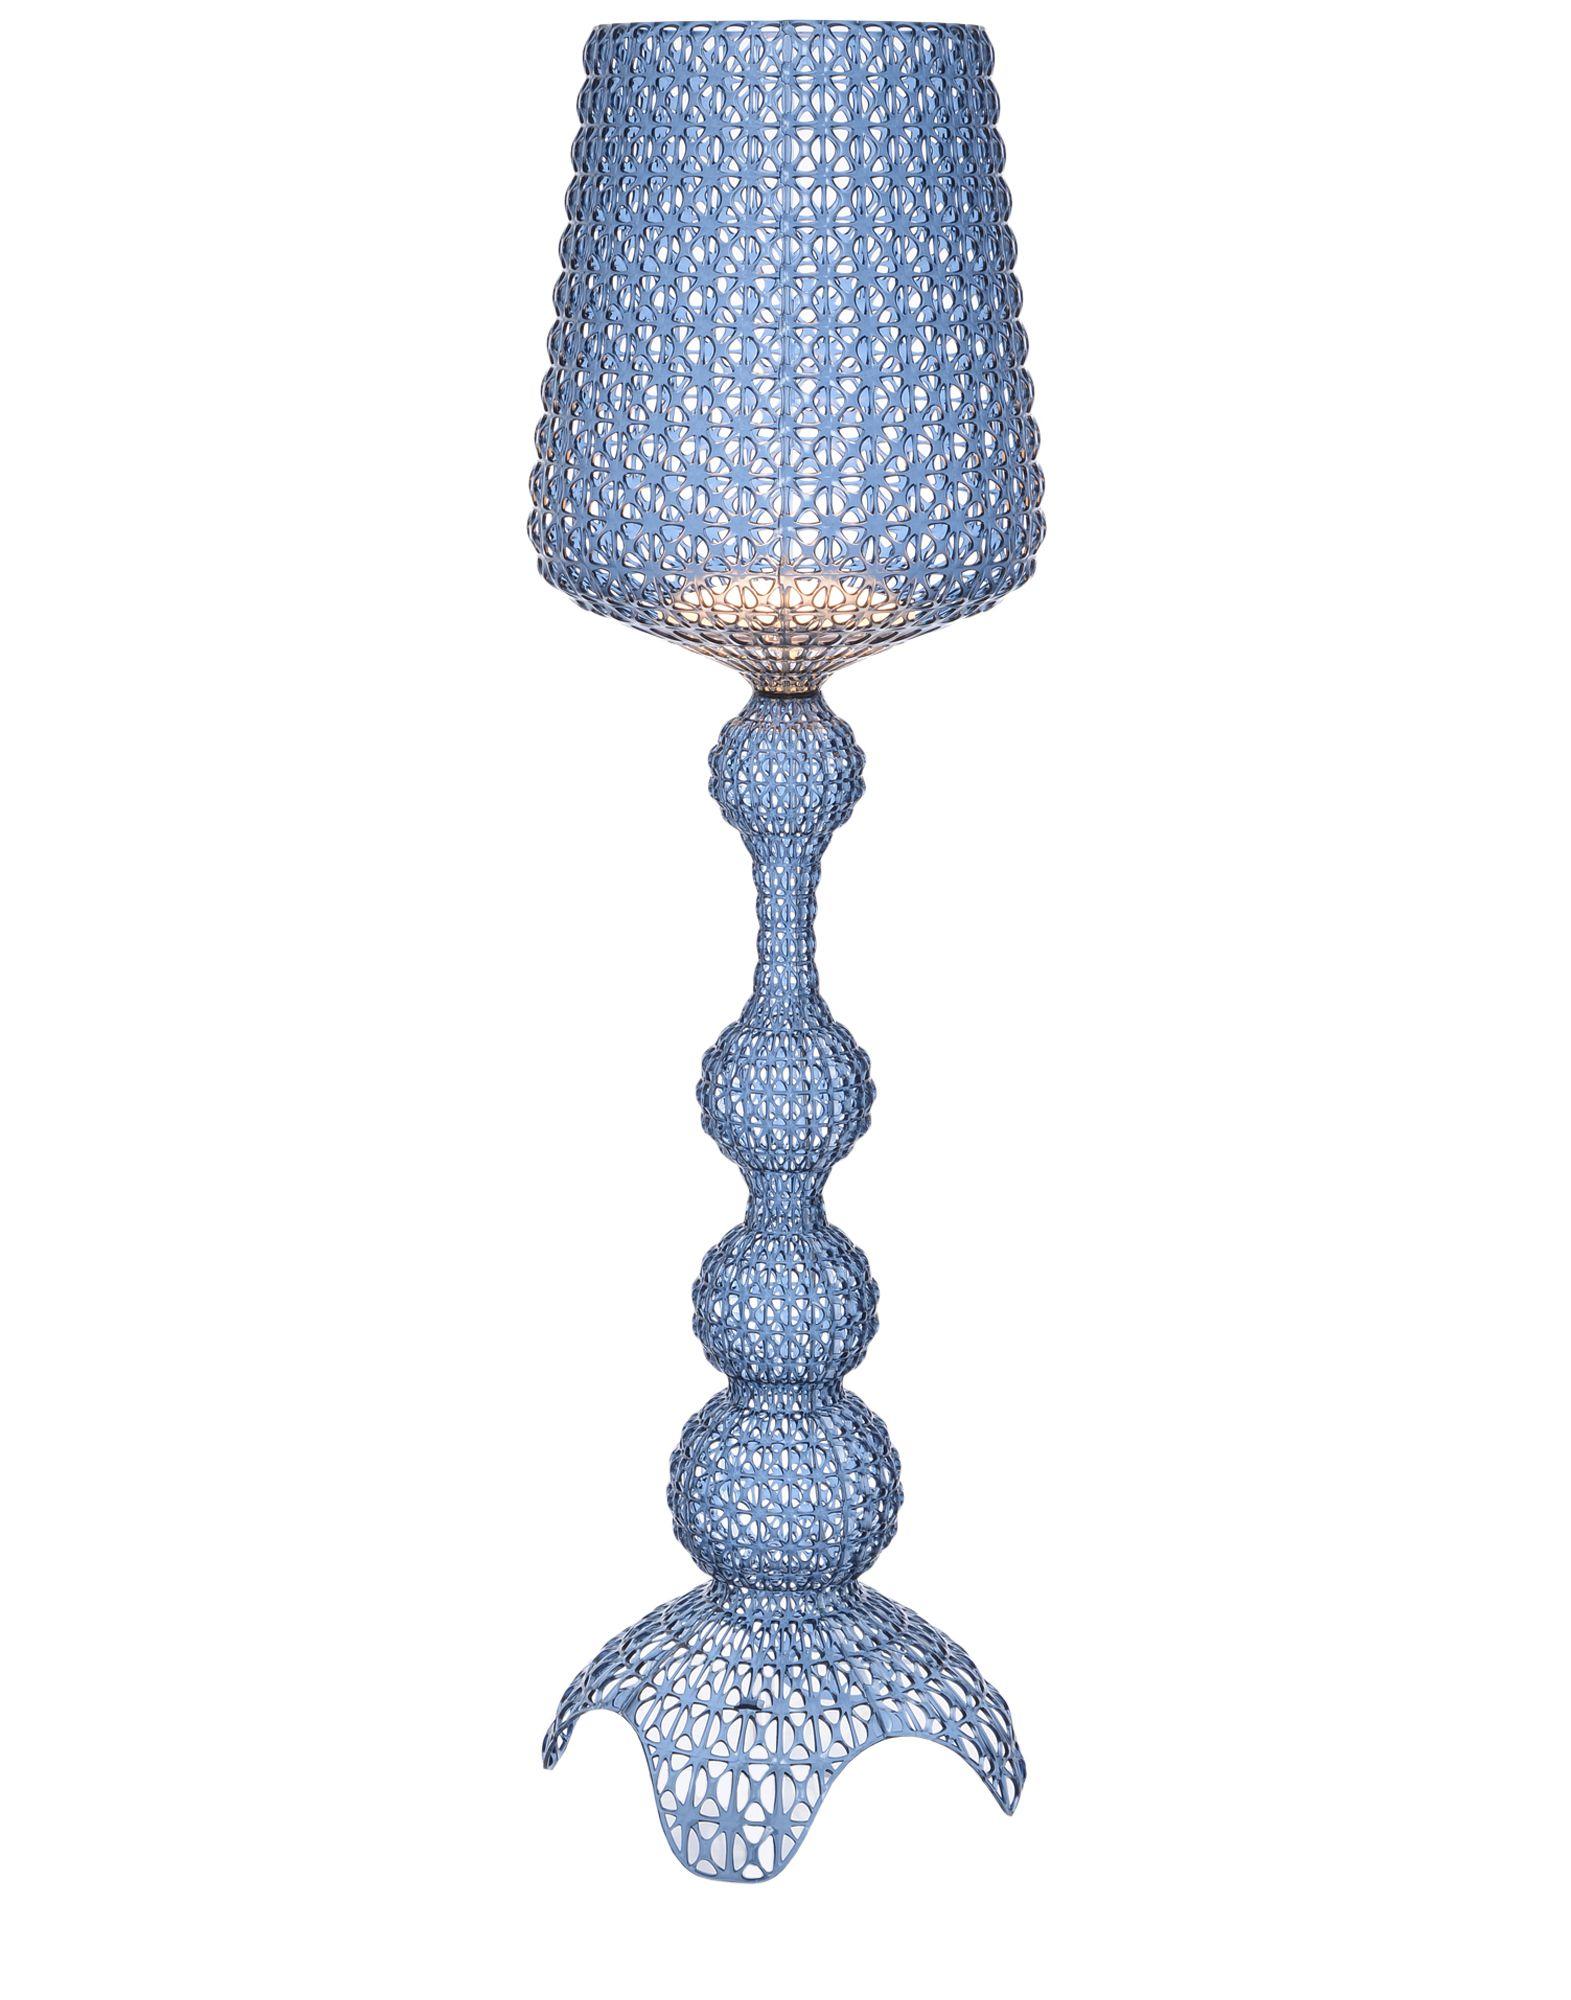 The Kabuki floor lamp is injection moulded. The sophisticated injection technology used makes it possible to crate a woven structure similar to lace with a unique perforated surface through which the light is diffused.

Dimensions: Height: 65.33